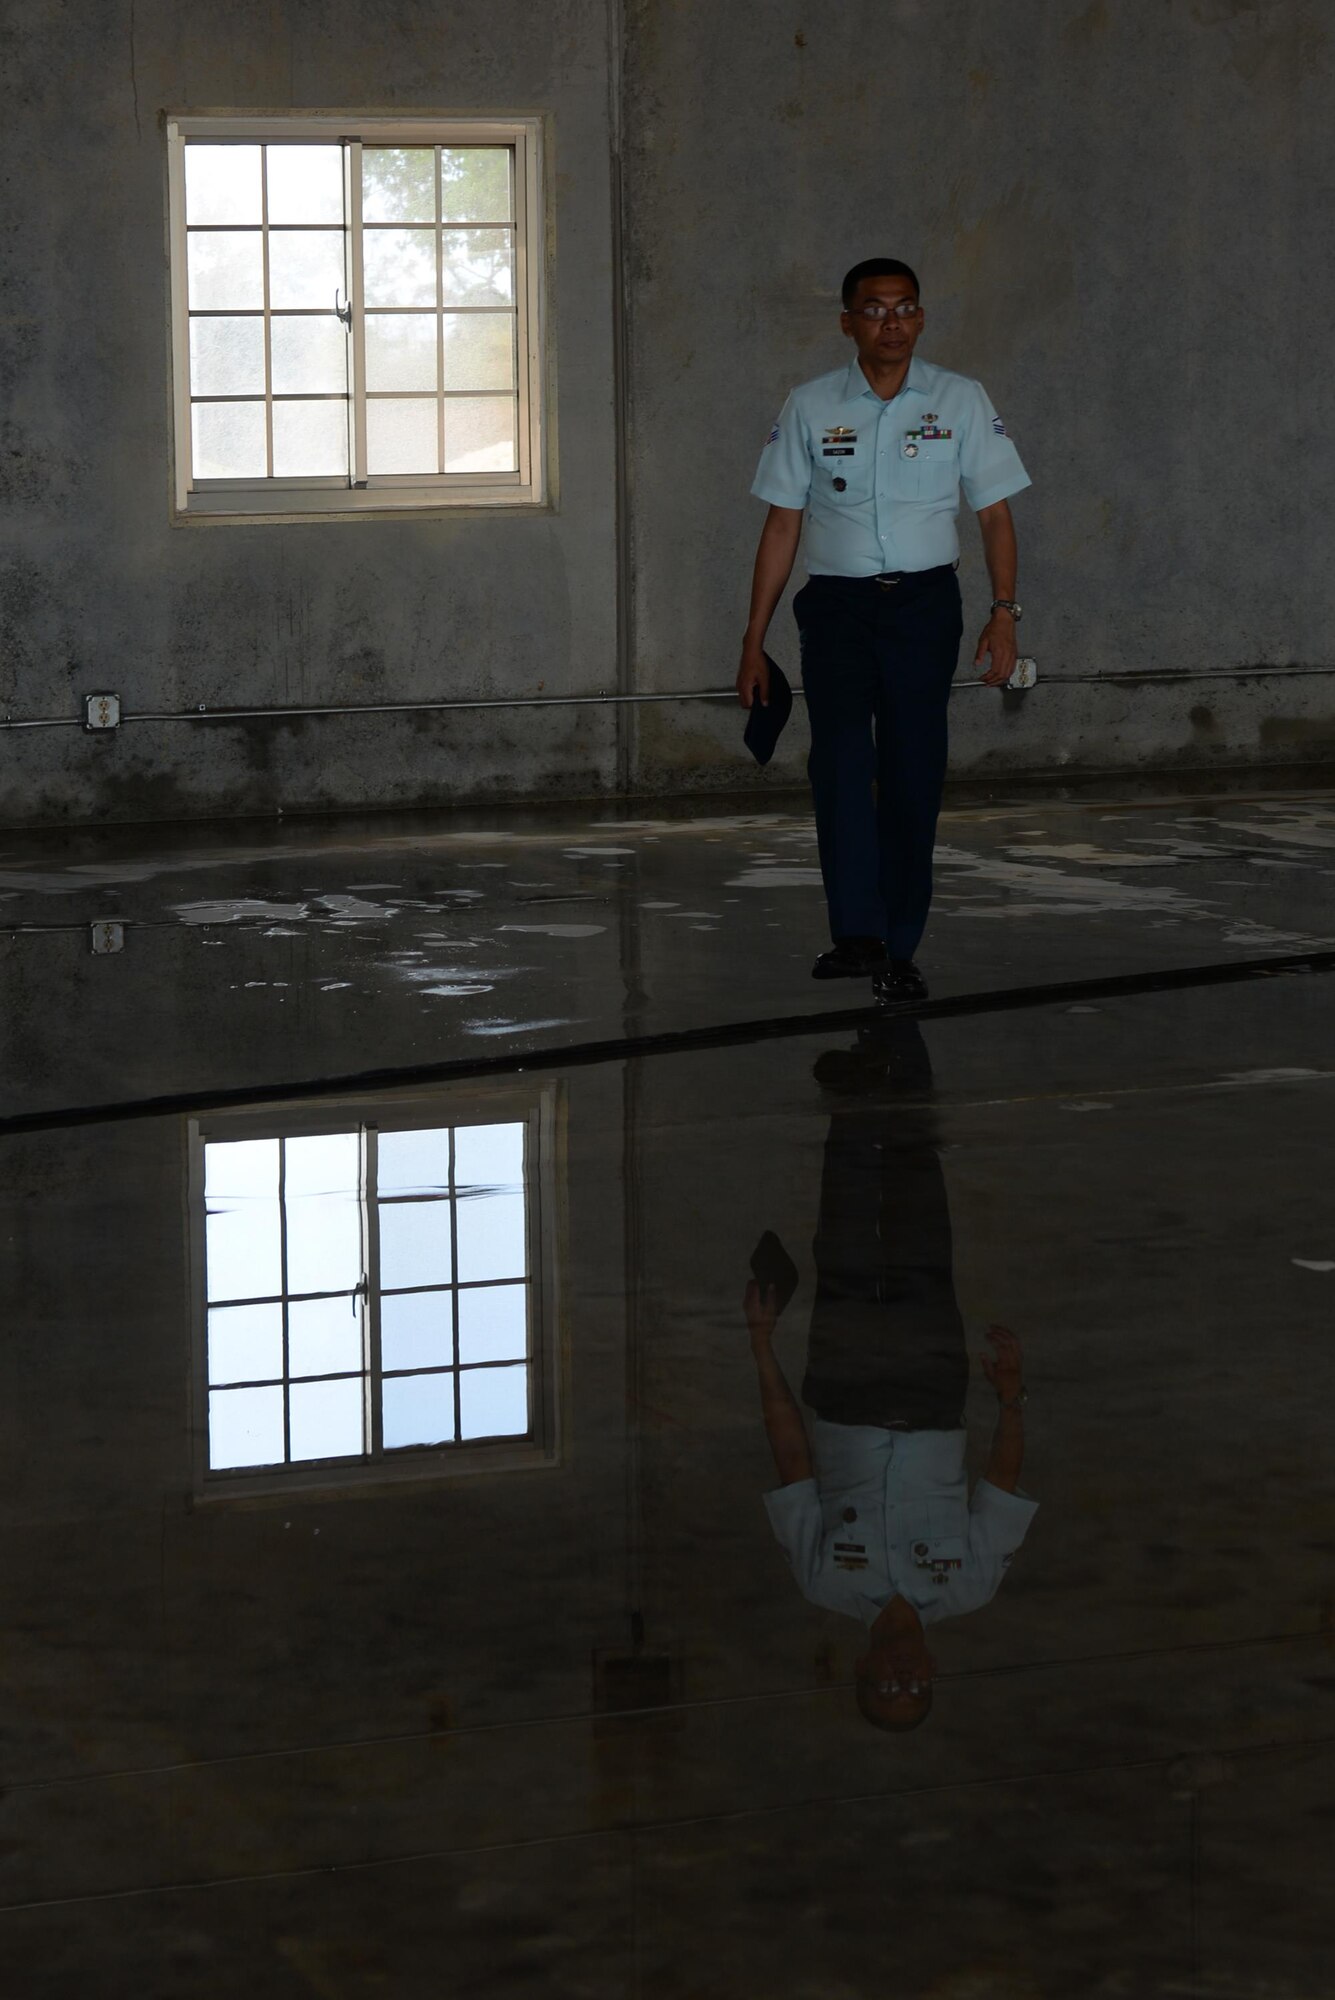 Philippine air force Staff Sgt. Generex Sazon, Air Force Chief of Engineers Office NCO in charge, tours a warehouse under construction at the Pacific Regional Training Center during a Pacific Unity event May 10, 2016, at Andersen Air Force Base, Guam. The Pacific Unity 16-1 tilt-up workshop is a Pacific Air Forces-led engagement focusing on a series of civil engineering subject-matter expert exchanges designed to increase partner capabilities, military relations and regional stability for the Indo-Asia-Pacific region. (U.S. Air Force photo by Airman 1st Class Jacob Skovo)